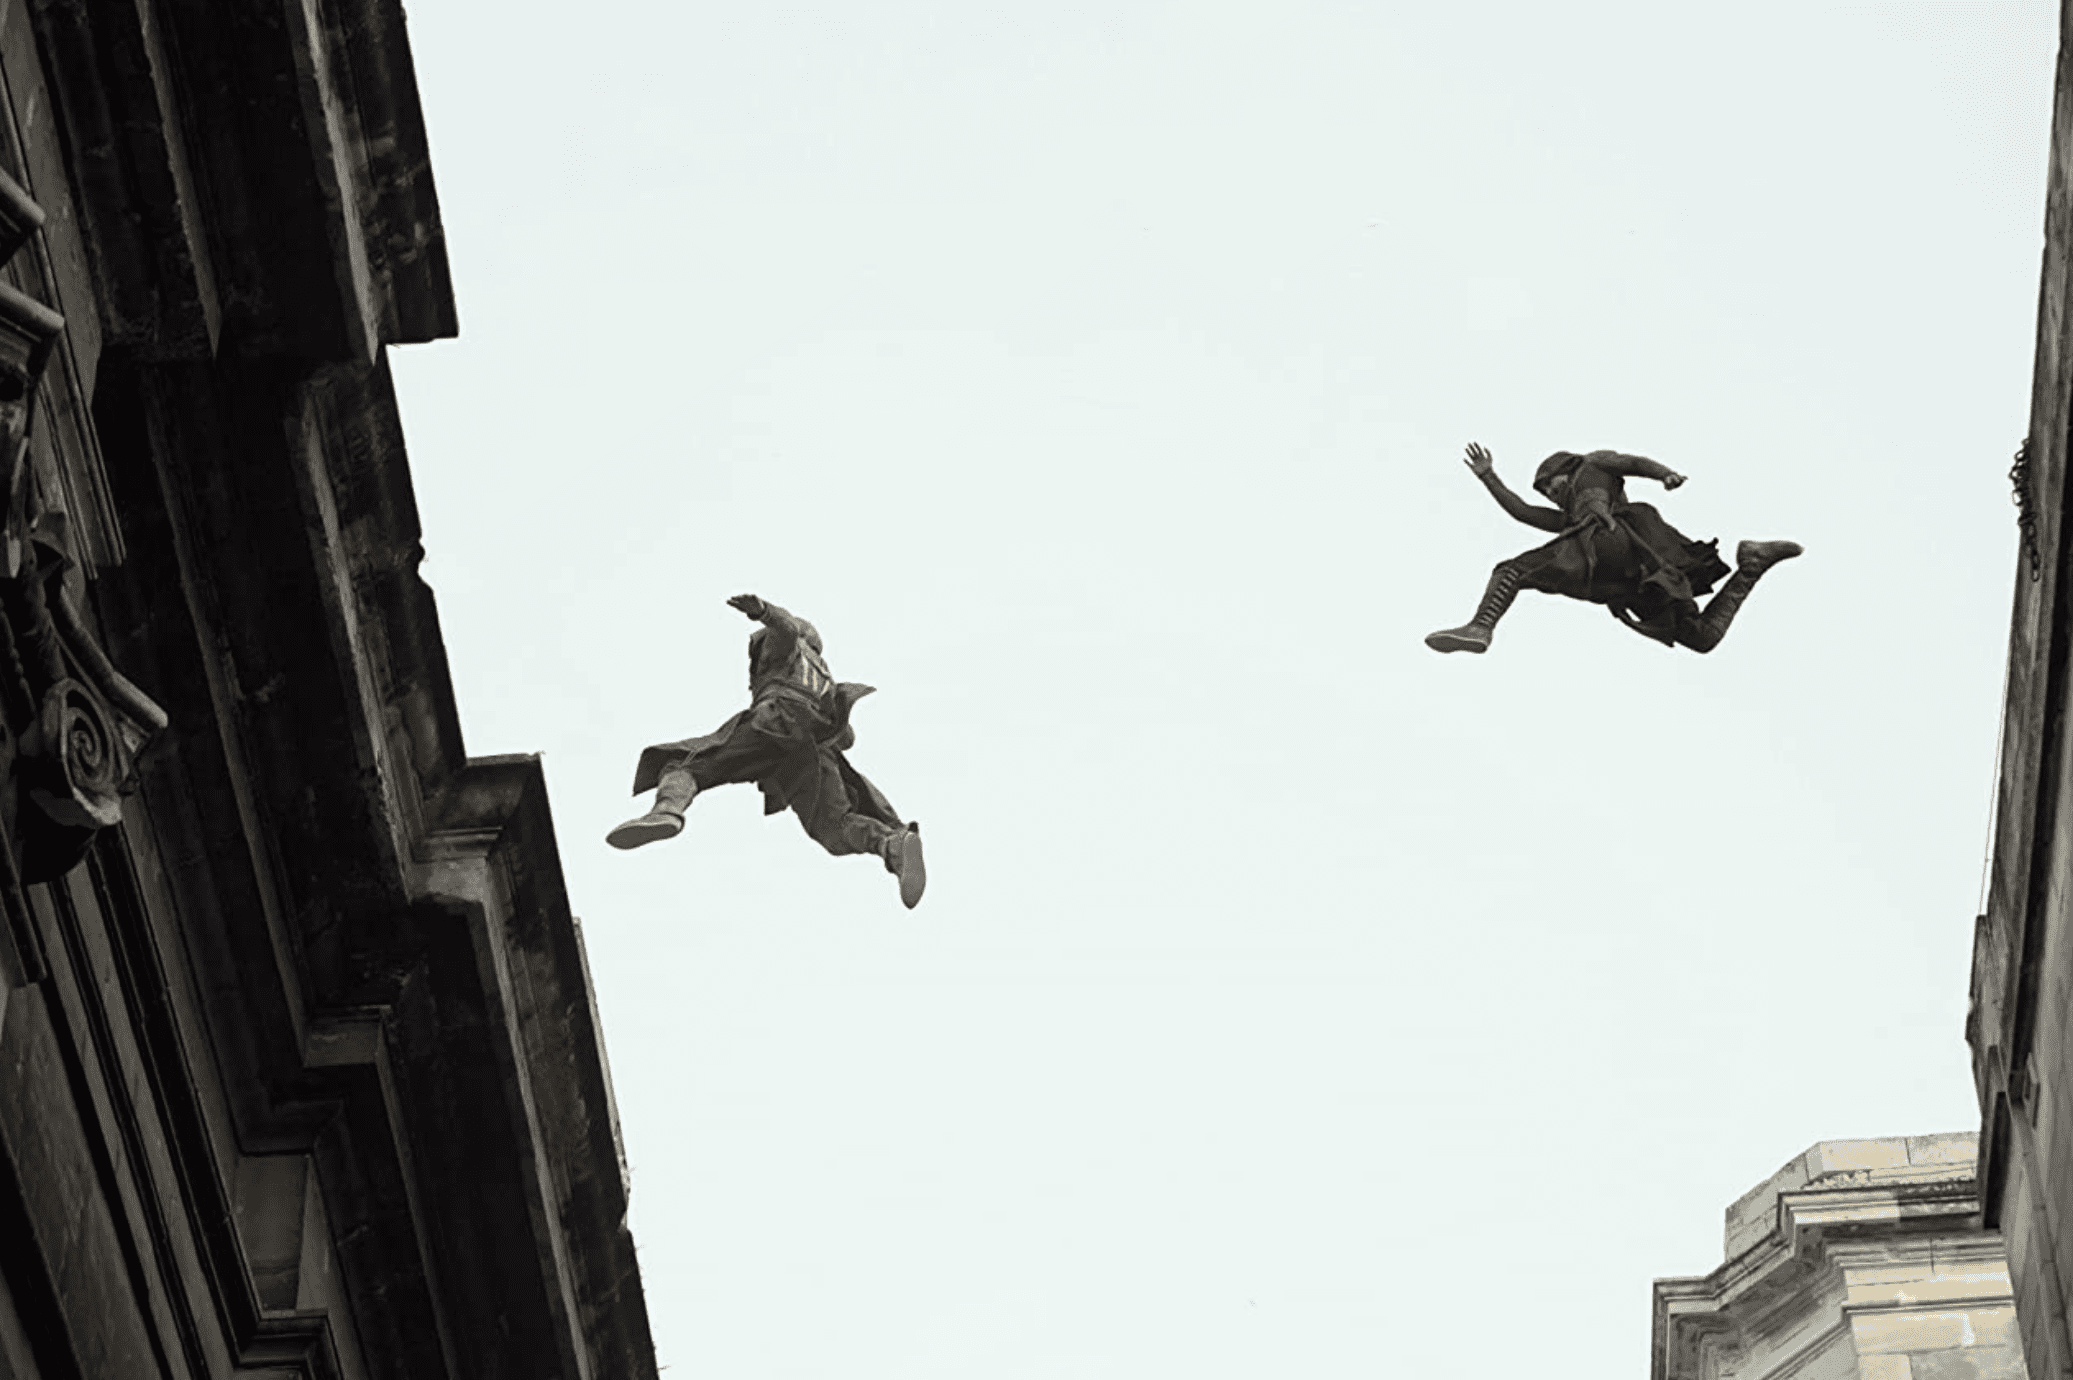 Cal leaps across buildings with Maria close behind